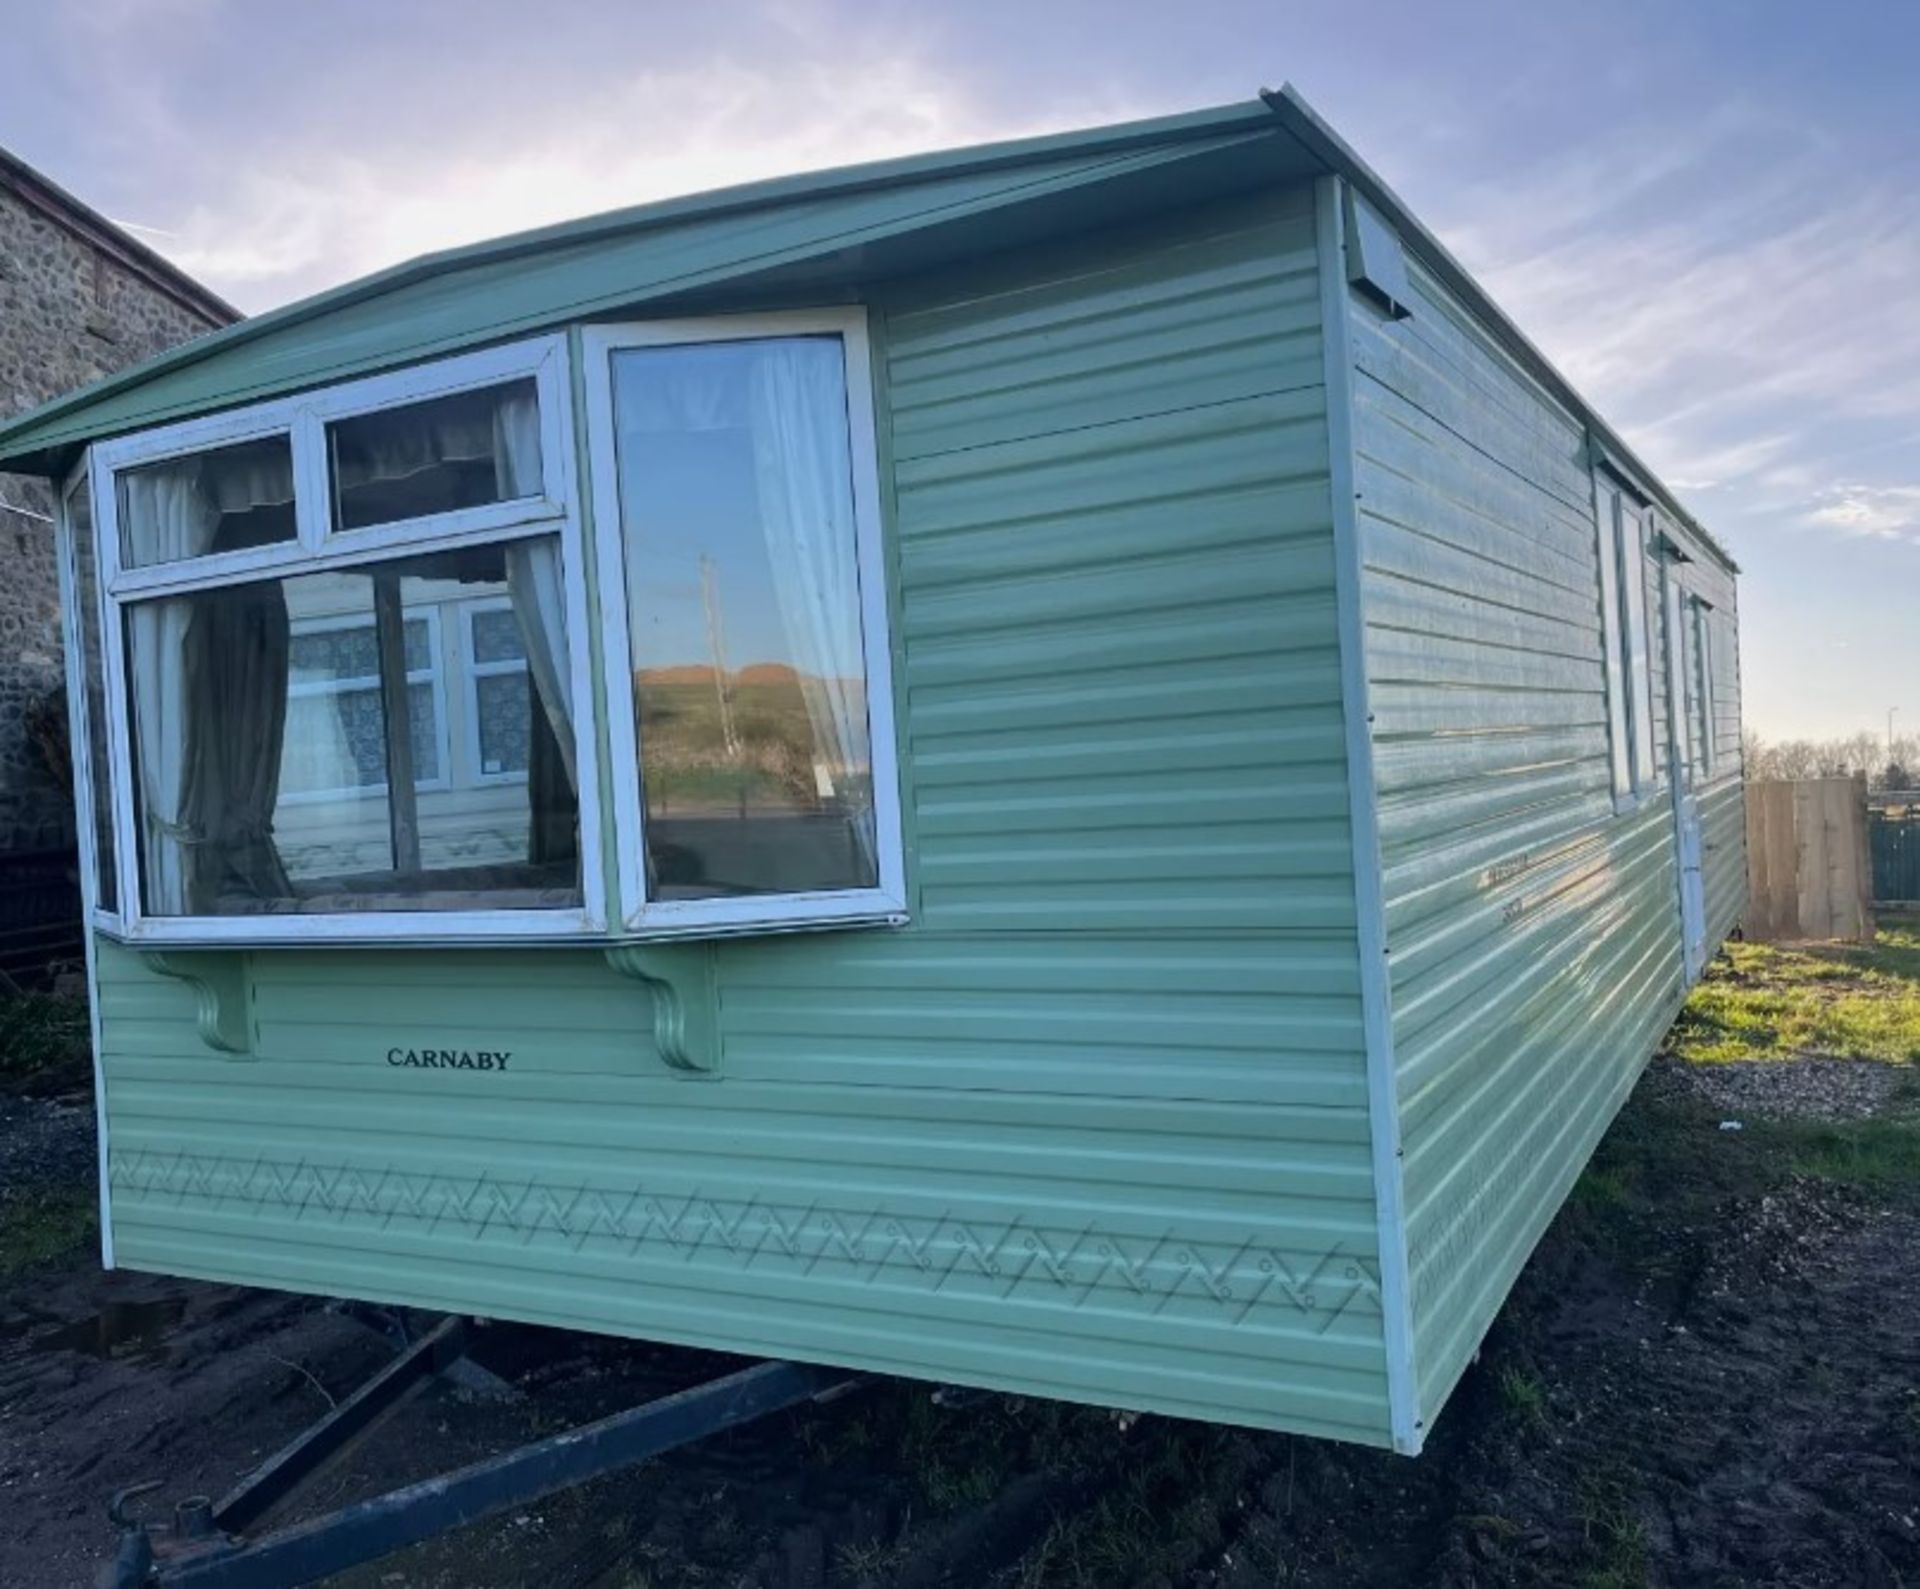 2004 CARNABY BELVEDERE STATIC CARAVAN - PERFECT PROJECT FOR YOUR DREAM RETREAT